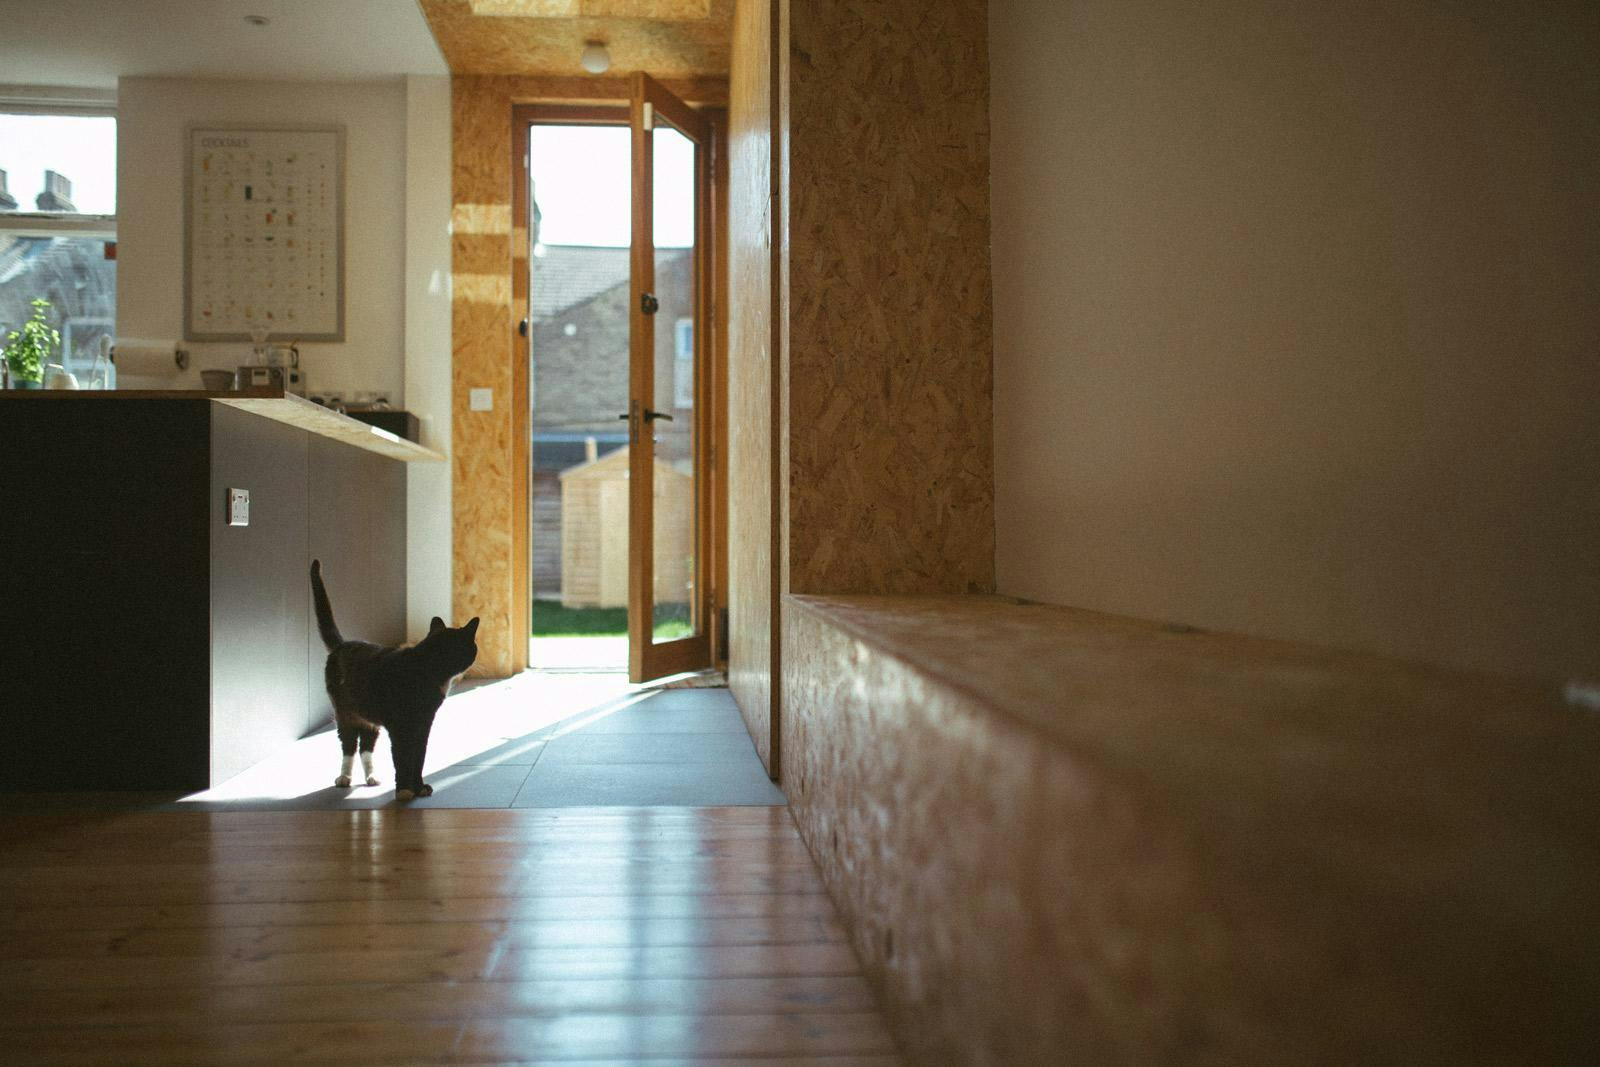 Kitchen extension with light through door to garden and cat